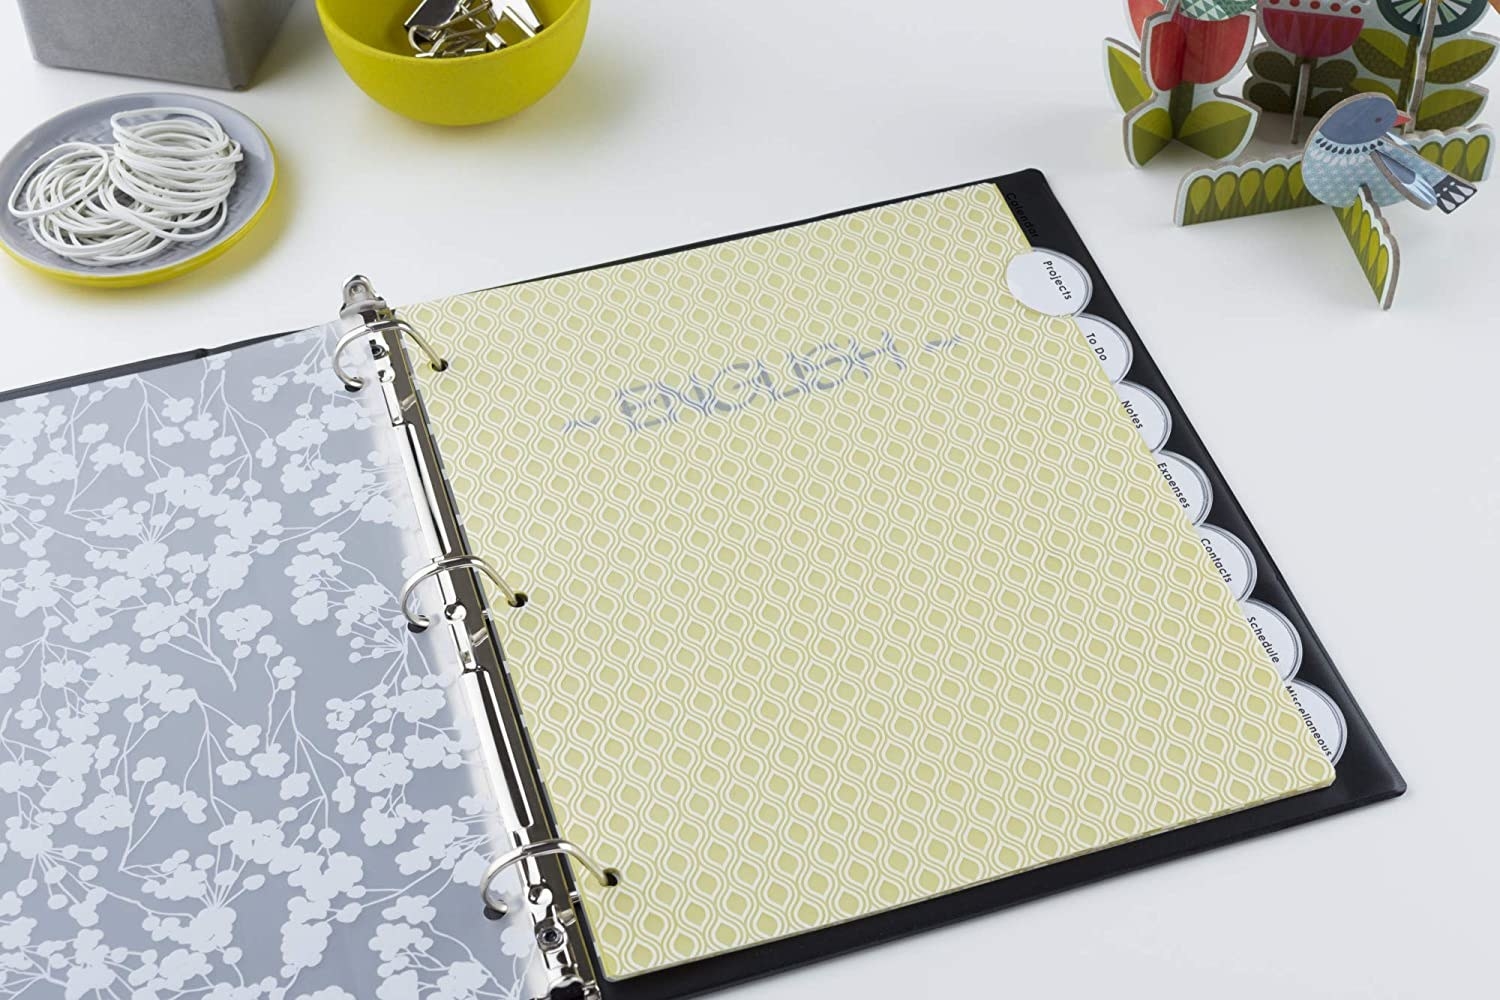 An open binder with the translucent floral print dividers inside